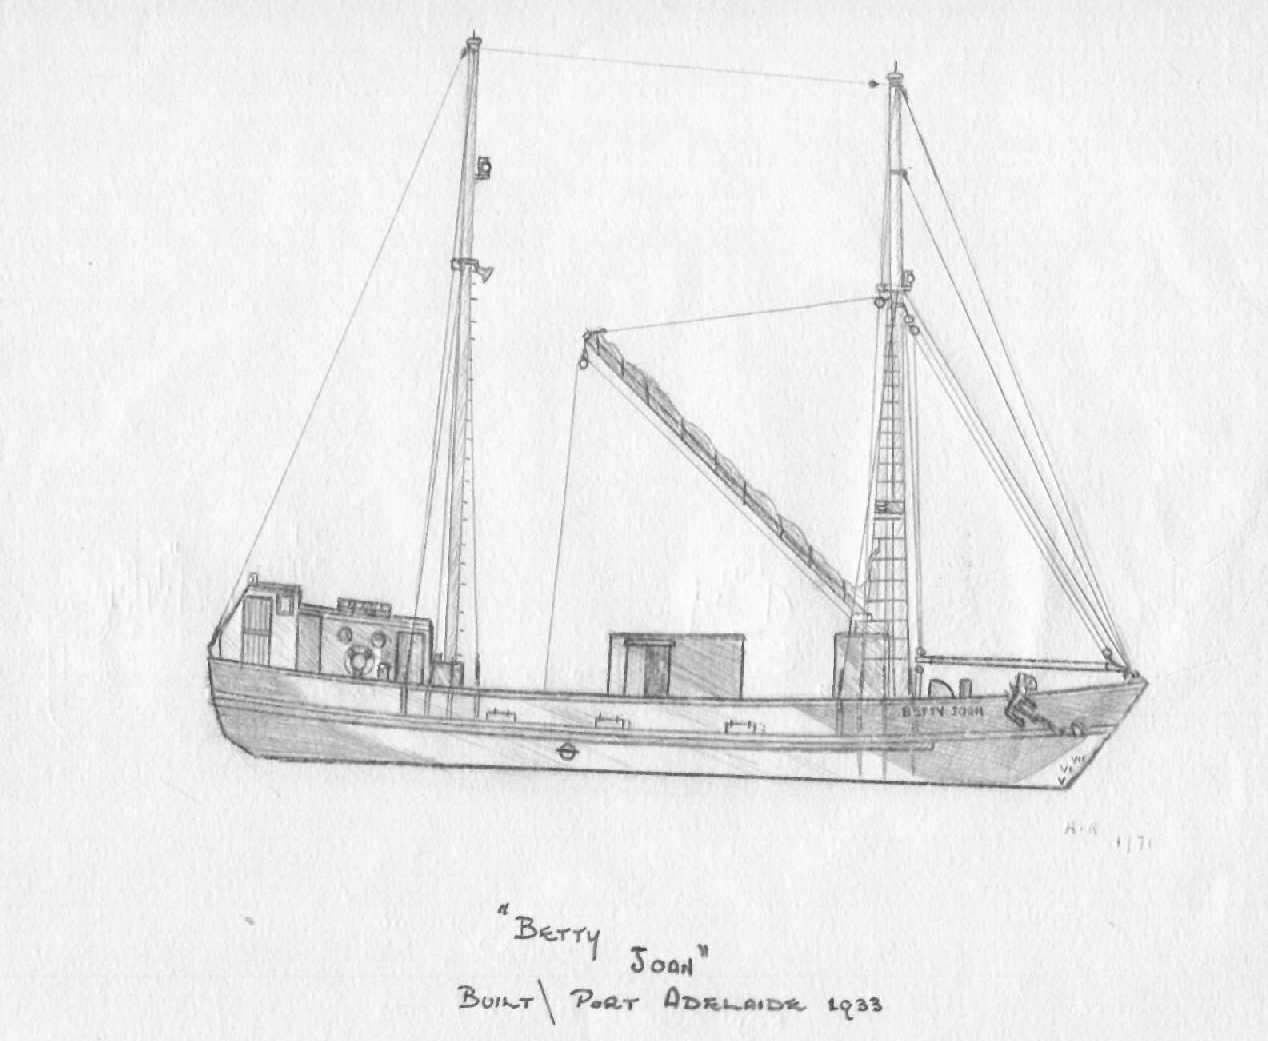 "Ketches of South Australia" by Ronald Parsons describes "Betty Joan" as a 78 gross ton vessel with auxillairy engines which reach 5 knots.   Built by A McFarlane & son, Birkenhead in 1933, she was owned by M Irvine and MB Crouch.   During world war 2, ve